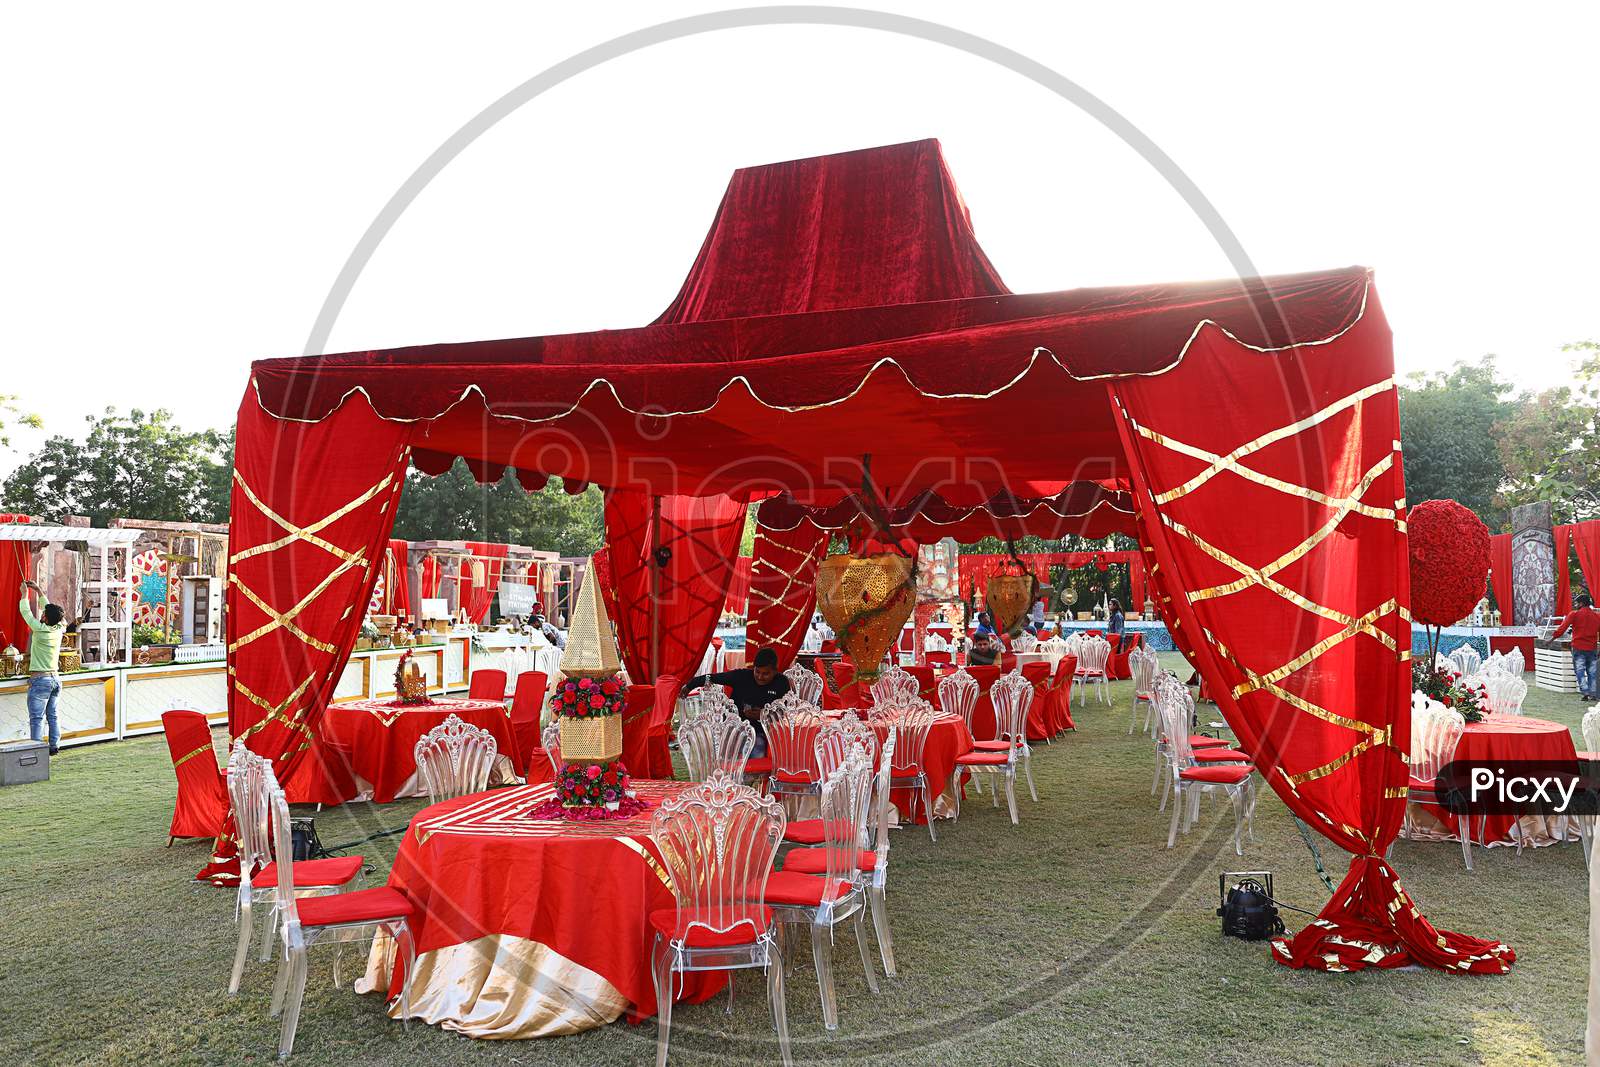 Jodhpur, Rajasthan, India, August 20Th, 2020: Luxury Decorated Round Dinner Tables With Red Color Tent And Flowers On Beautifully Decorated Backyard, Indian Outdoor Wedding Ceremony Or Event